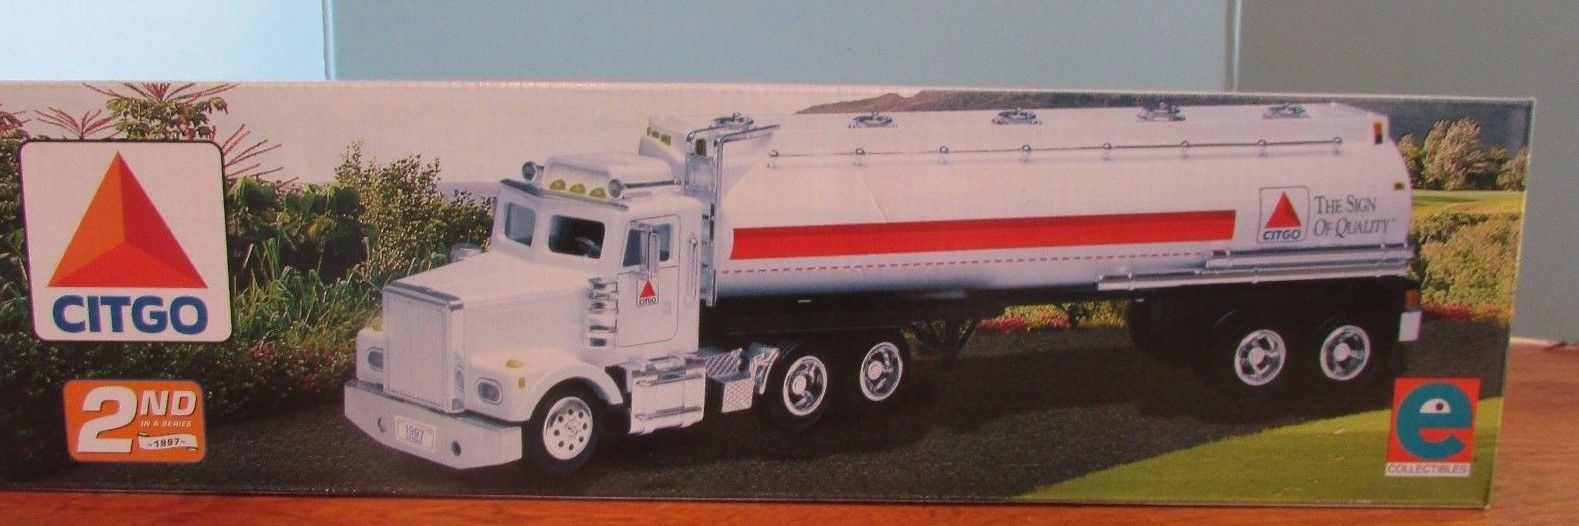 citgo  toy tanker truck 2nd in a series 1997  collectors  W/Box